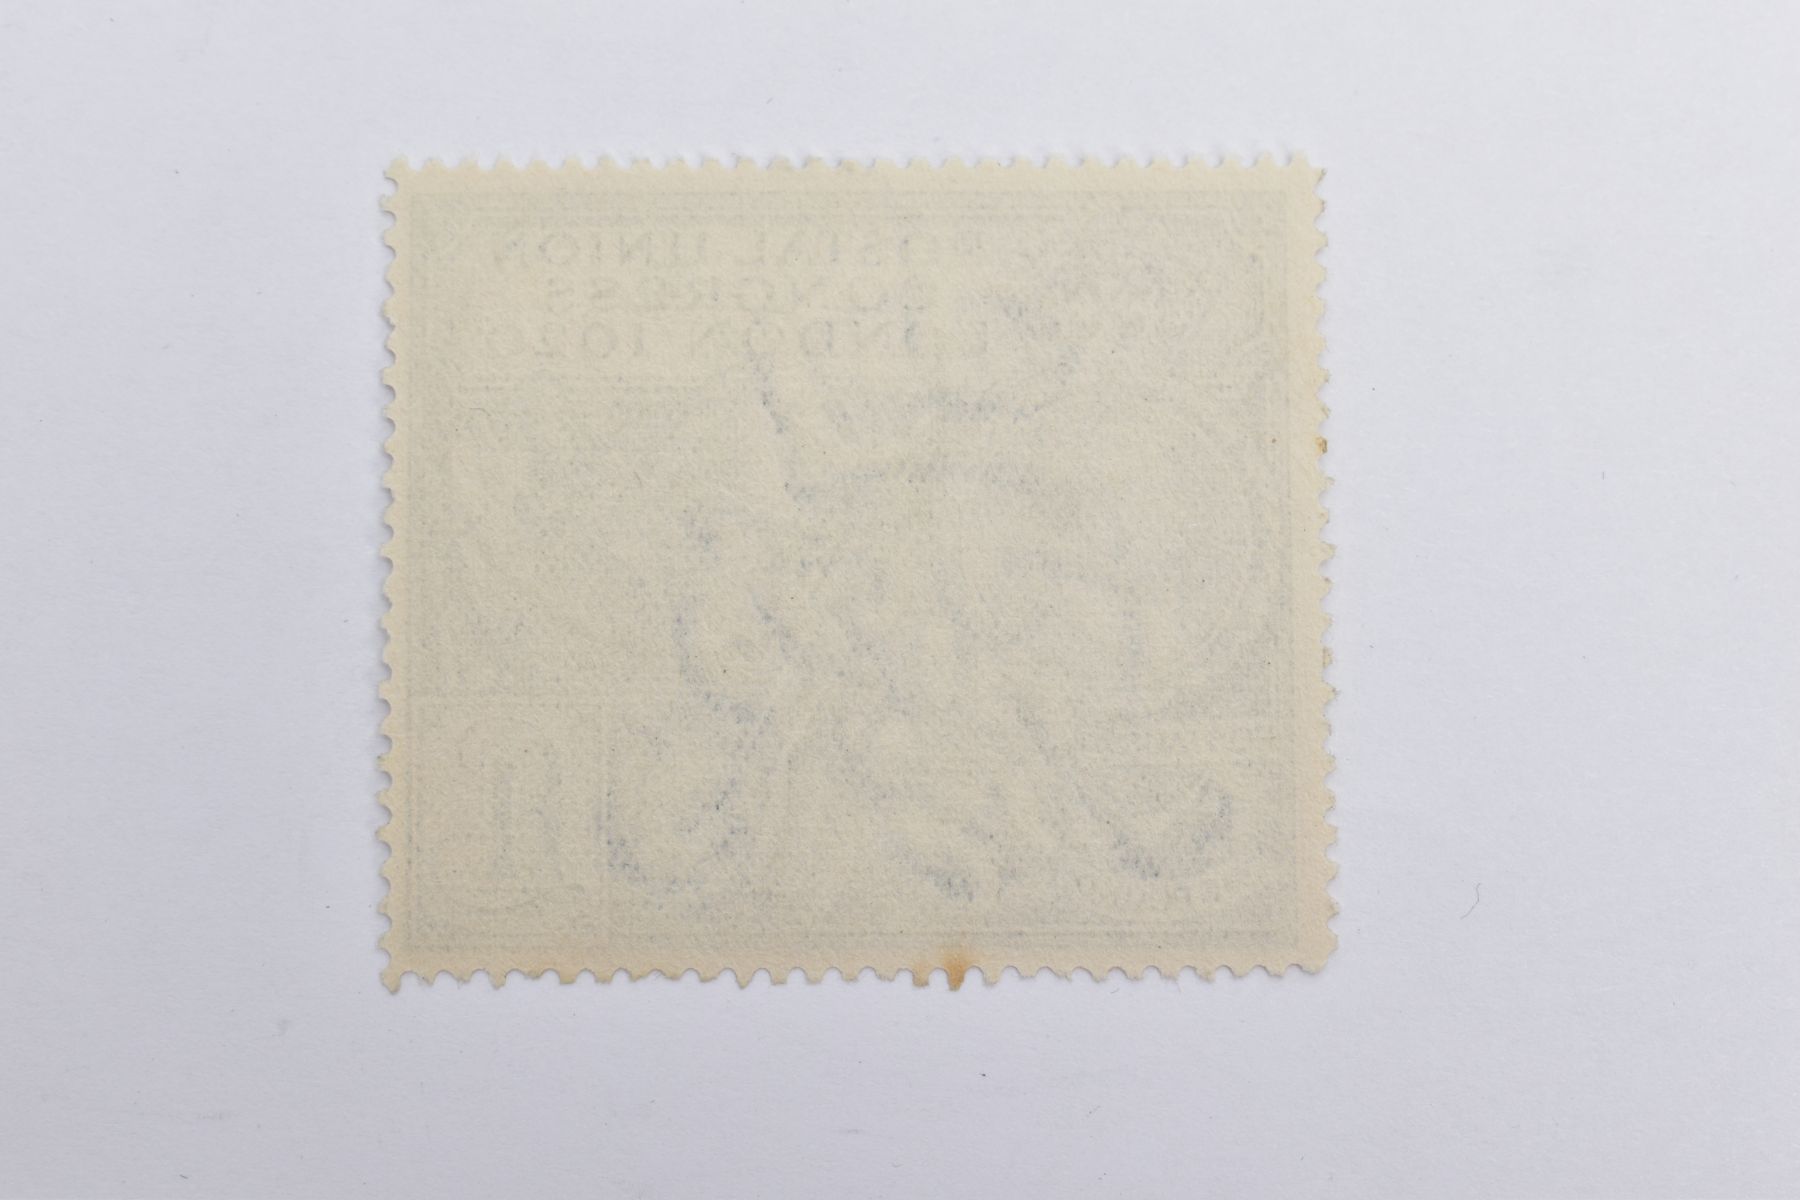 A 1929 'POSTAL UNION CONGRESS LONDON' ONE POUND POSTAL STAMP, depicting St. George and a dragon - Image 2 of 2